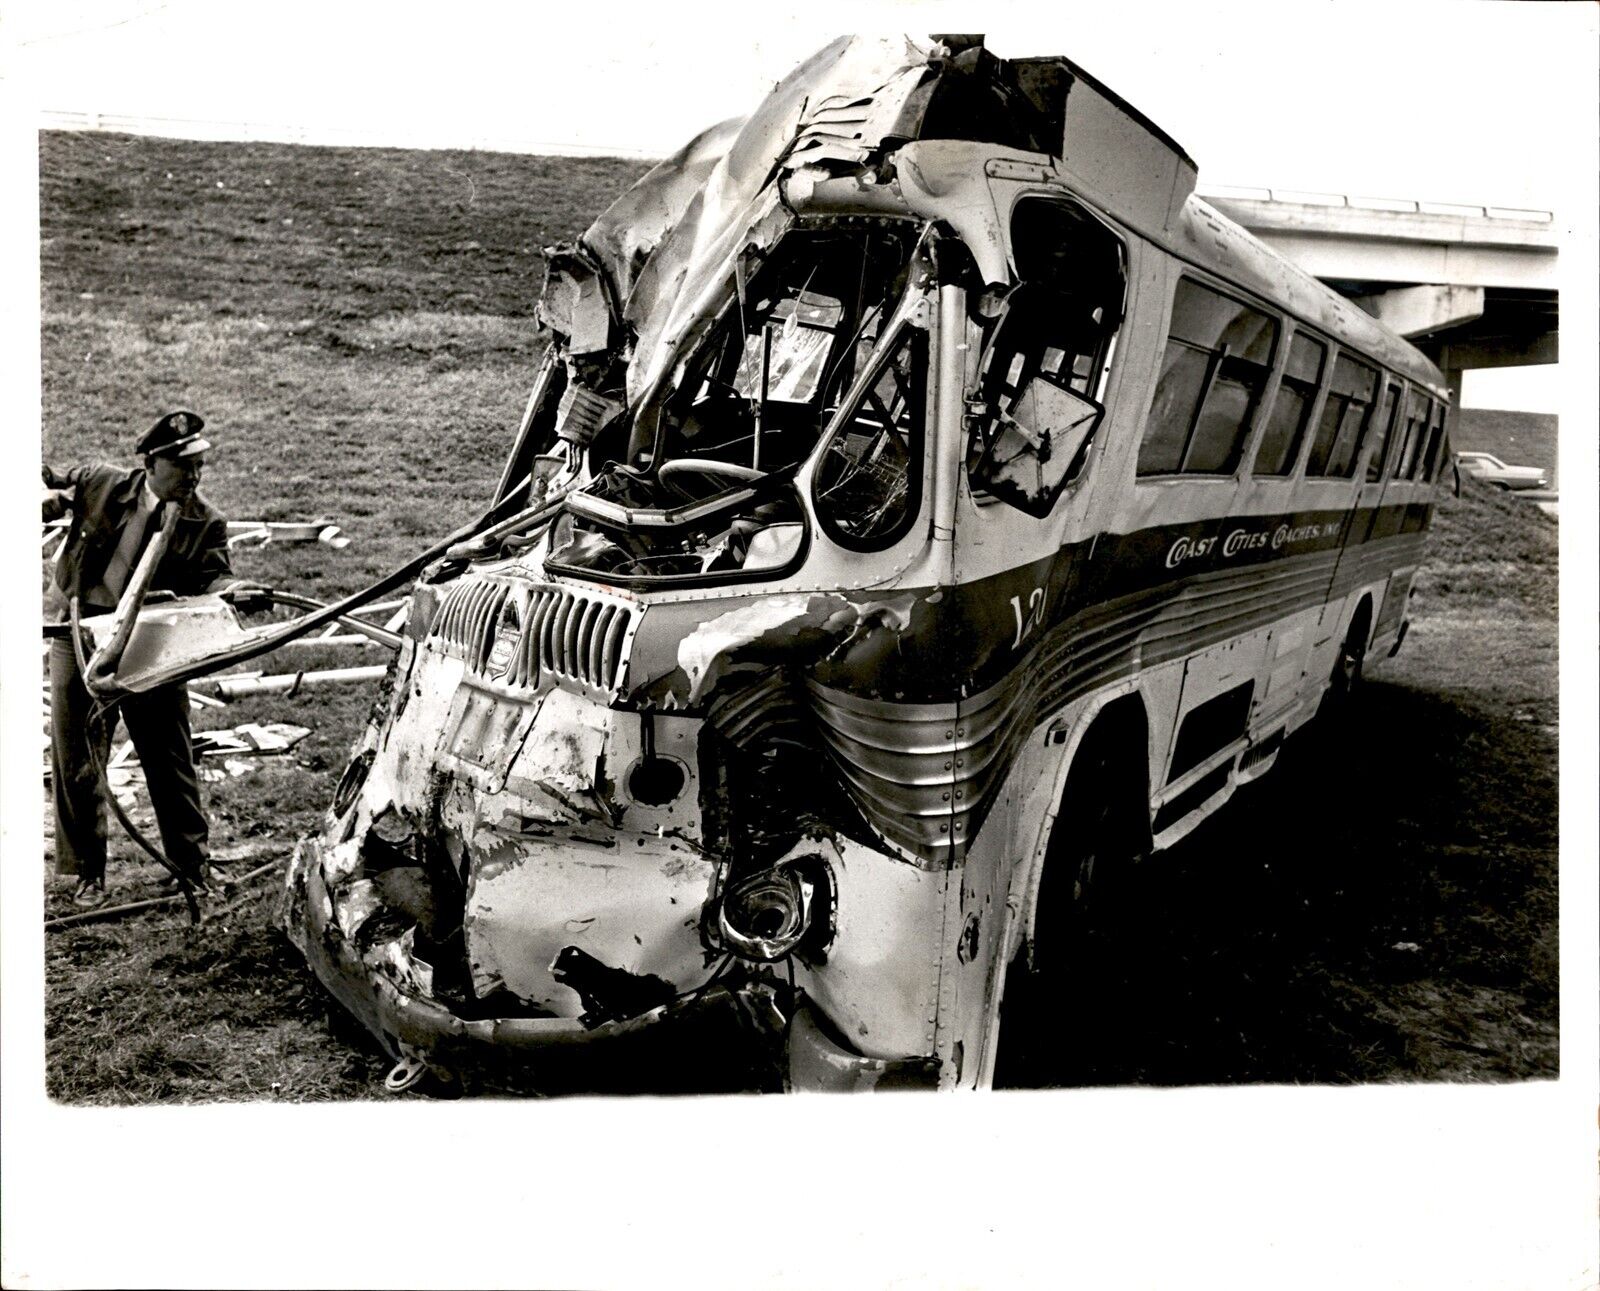 LG991 1966 Orig Eamon Kennedy Photo 1947 BUS A TOTAL LOSS AFTER EXPRESSWAY LEAP